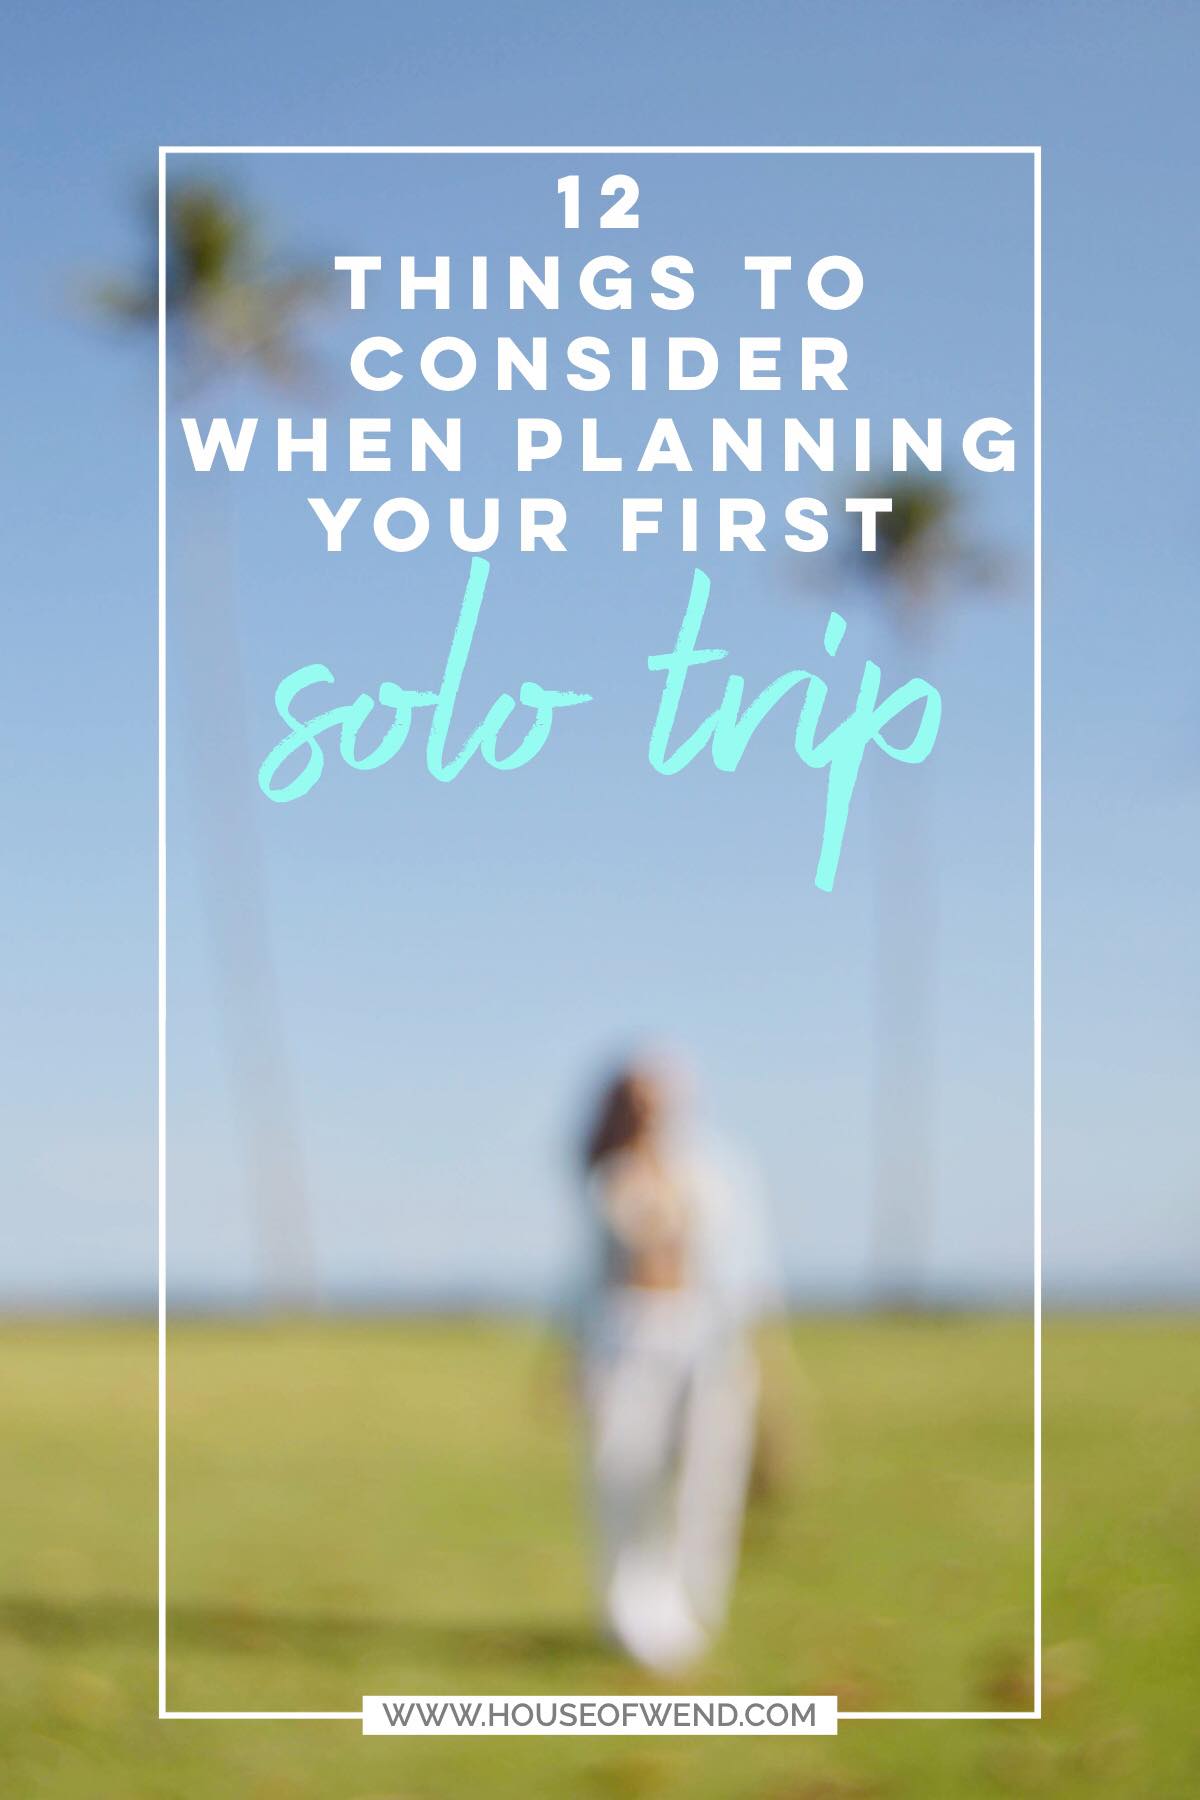 Tips for planning your first solo trip